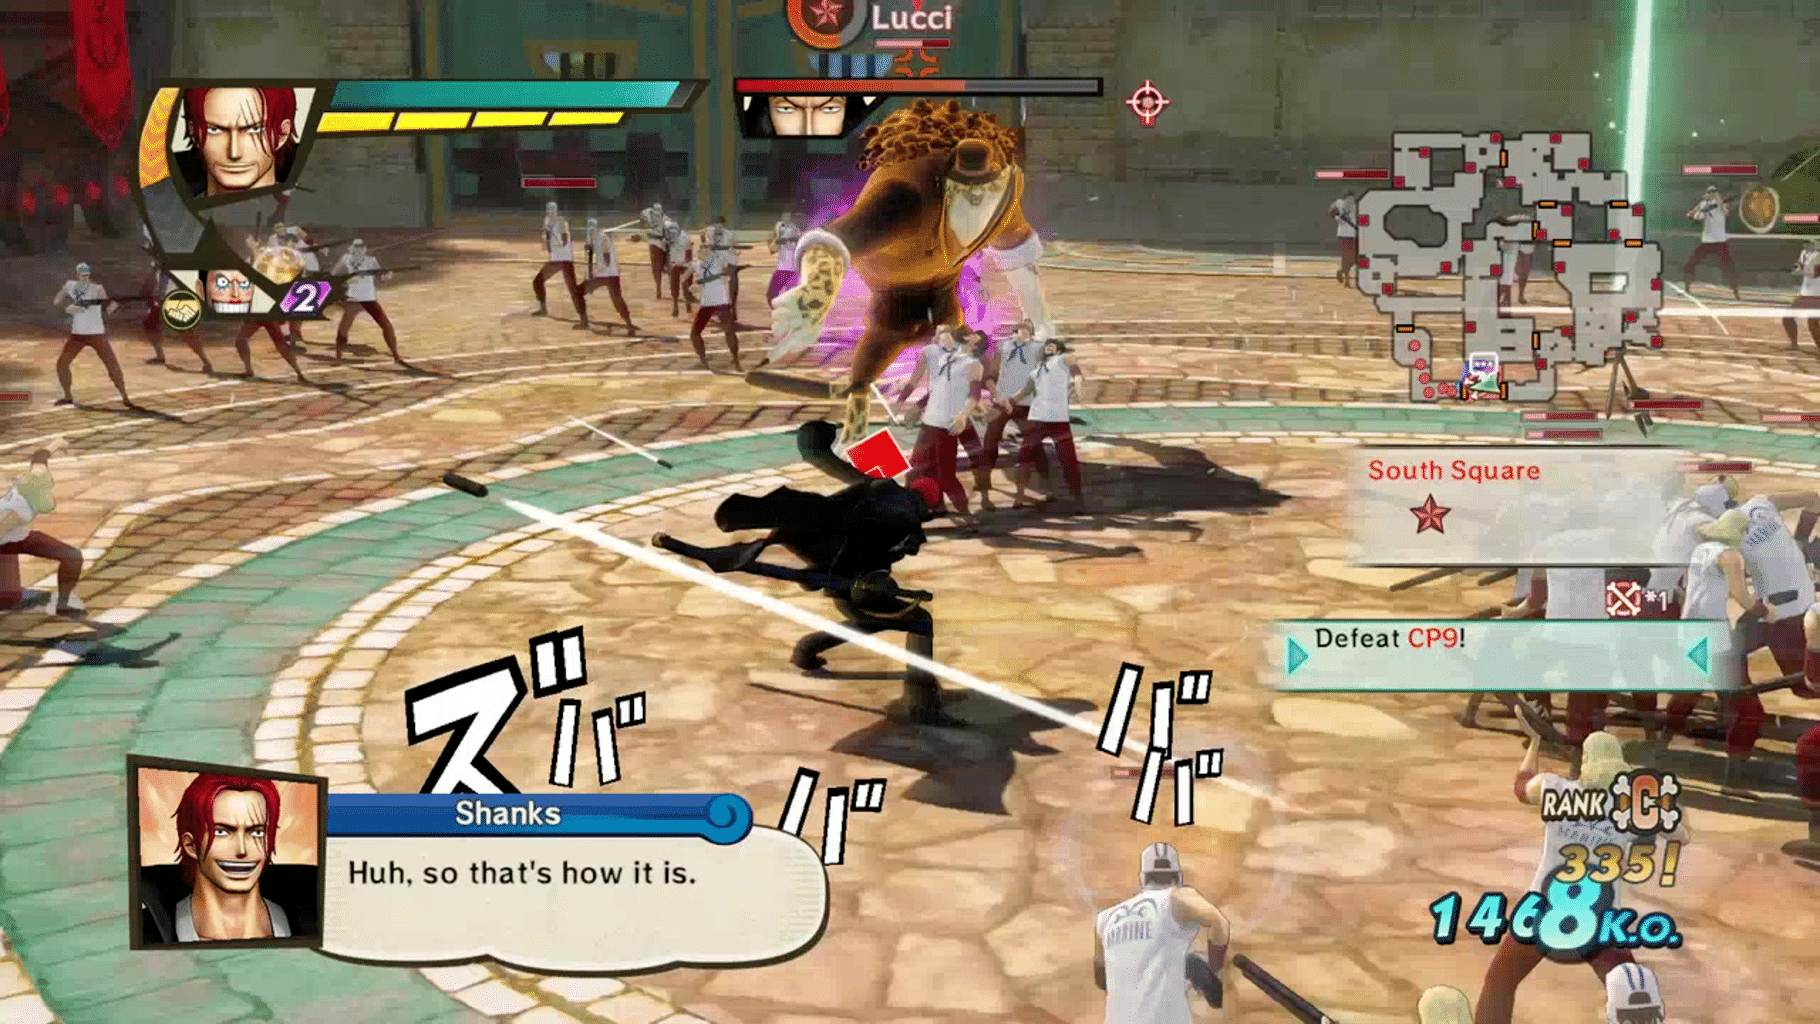 One Piece: Pirate Warriors 3 (for PC)